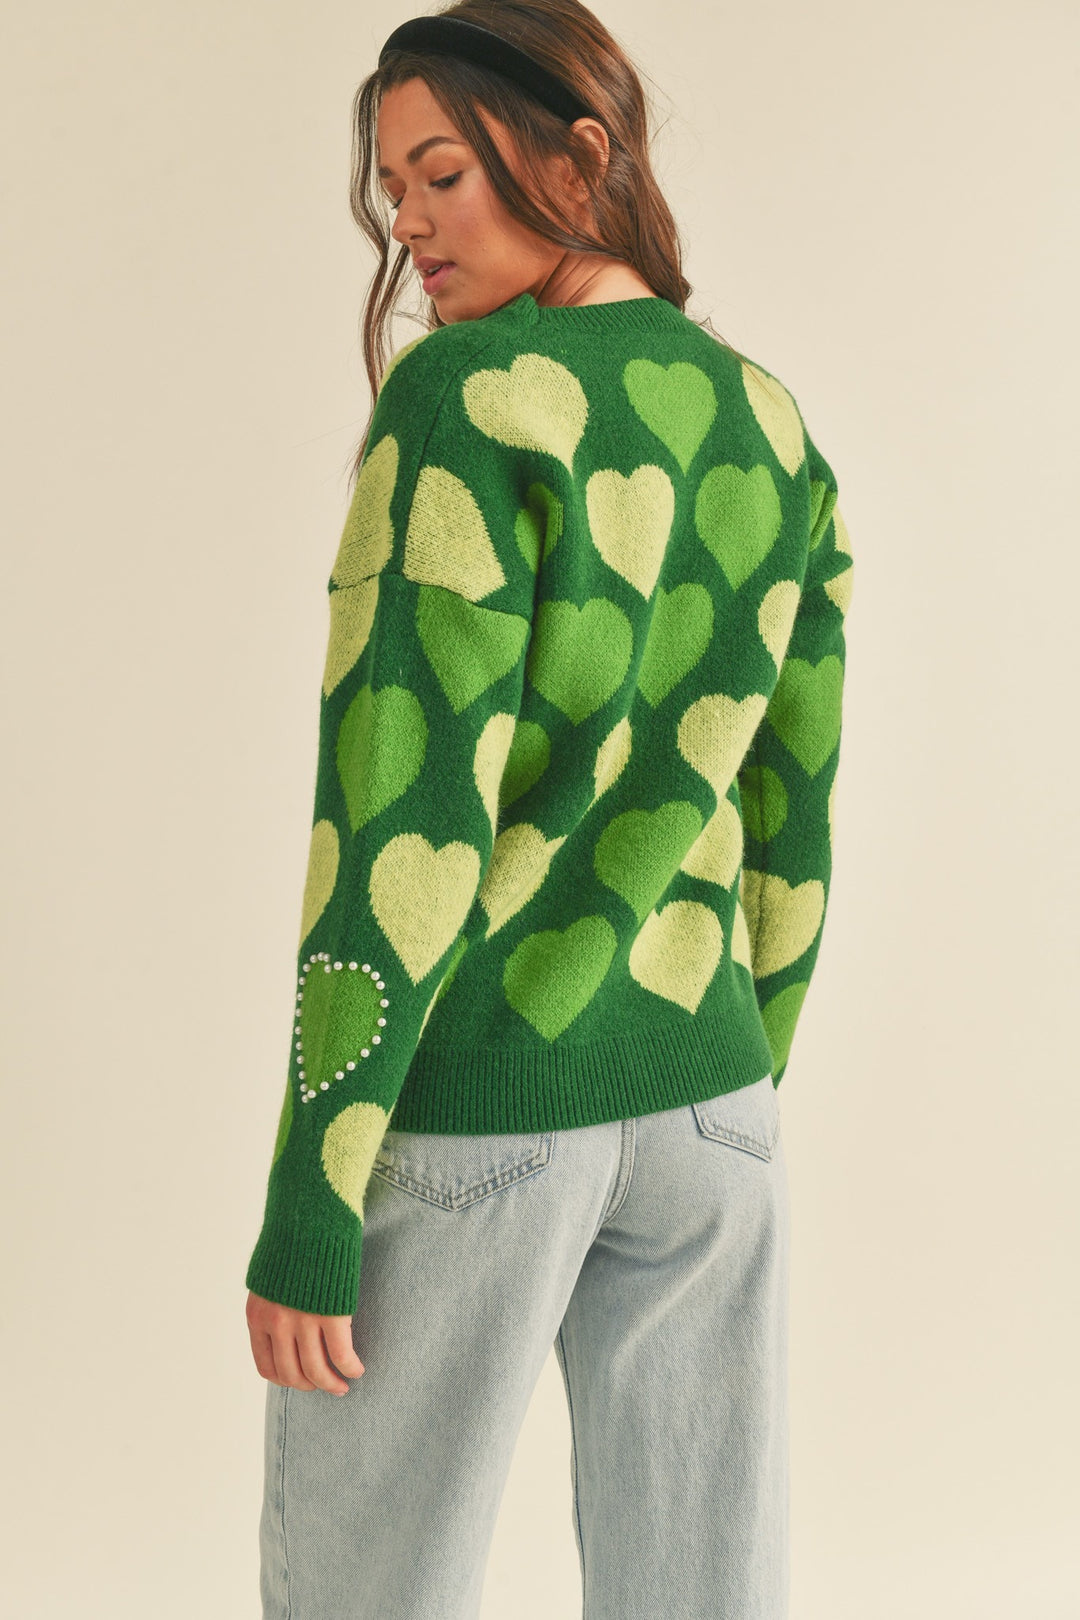 PEARL EMBELLISHED HEART SWEATER in Green